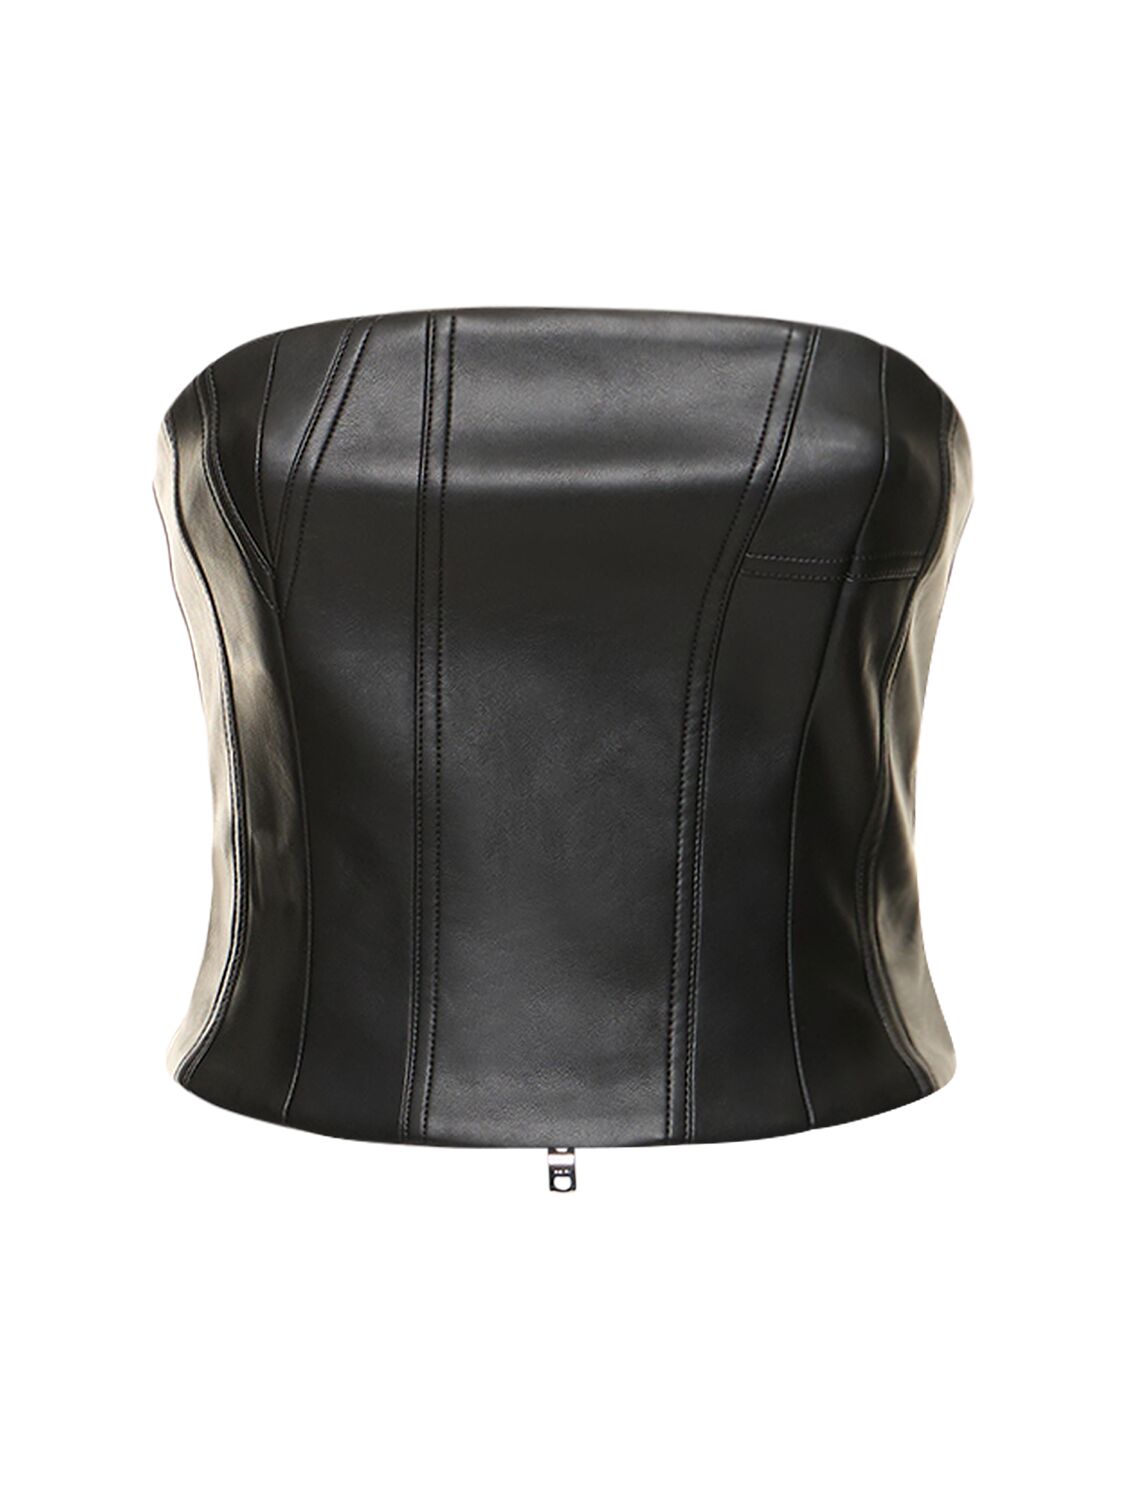 Strapless Faux Leather Bustier